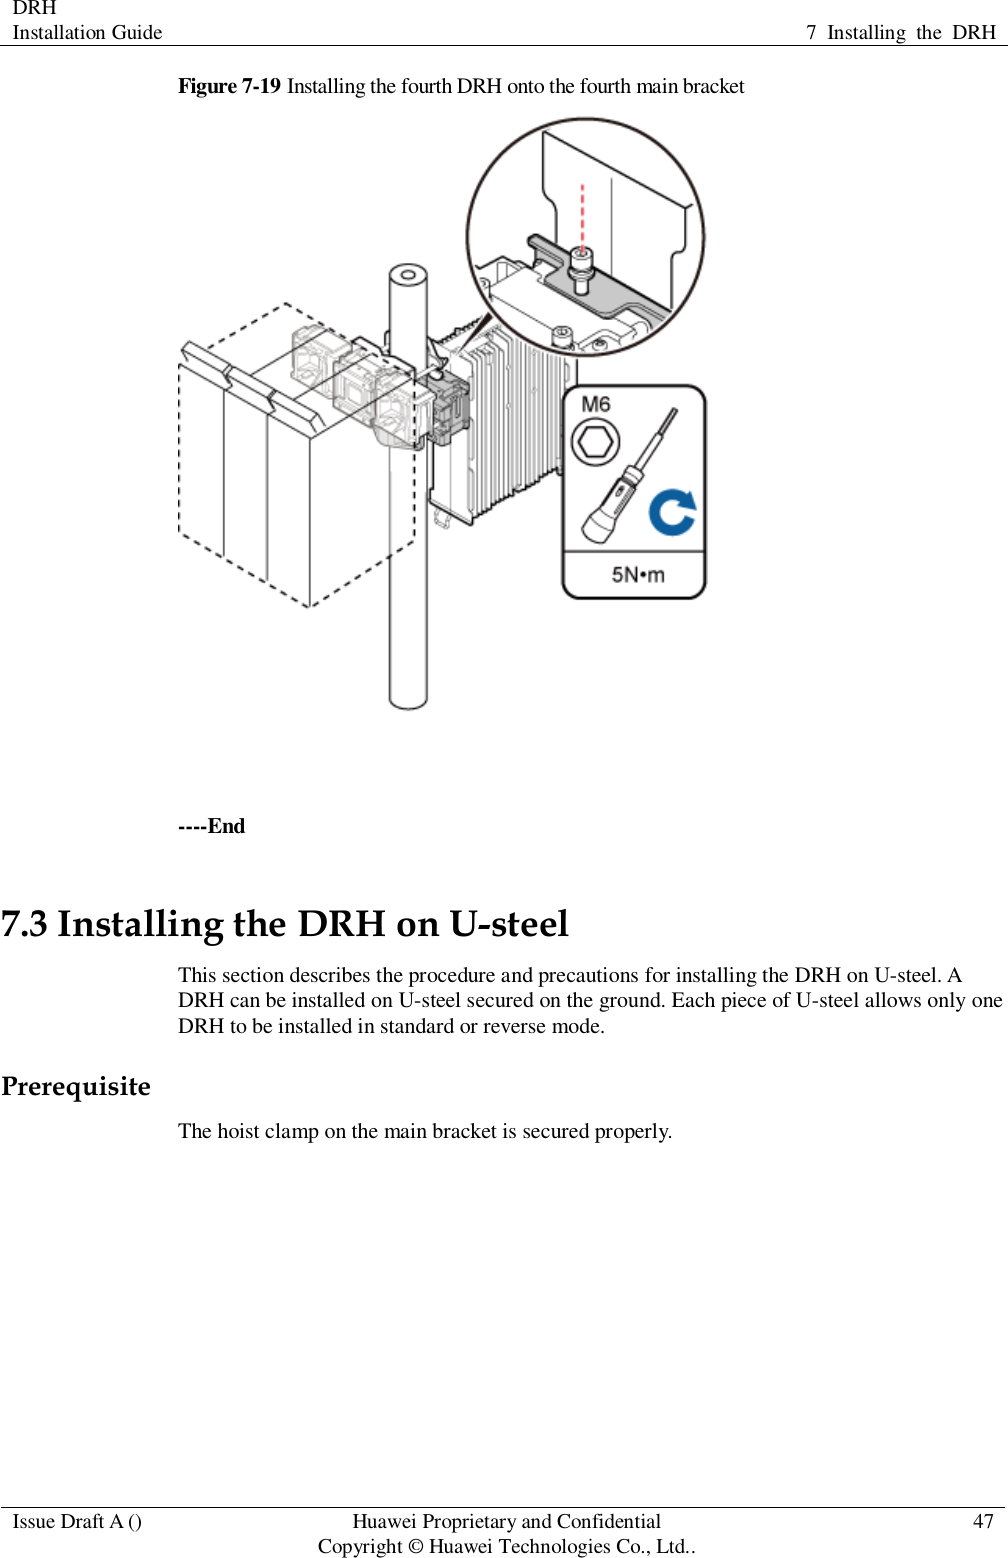 DRH   Installation Guide 7  Installing  the  DRH  Issue Draft A () Huawei Proprietary and Confidential                                     Copyright © Huawei Technologies Co., Ltd.. 47  Figure 7-19 Installing the fourth DRH onto the fourth main bracket   ----End 7.3 Installing the DRH on U-steel This section describes the procedure and precautions for installing the DRH on U-steel. A DRH can be installed on U-steel secured on the ground. Each piece of U-steel allows only one DRH to be installed in standard or reverse mode. Prerequisite The hoist clamp on the main bracket is secured properly.  